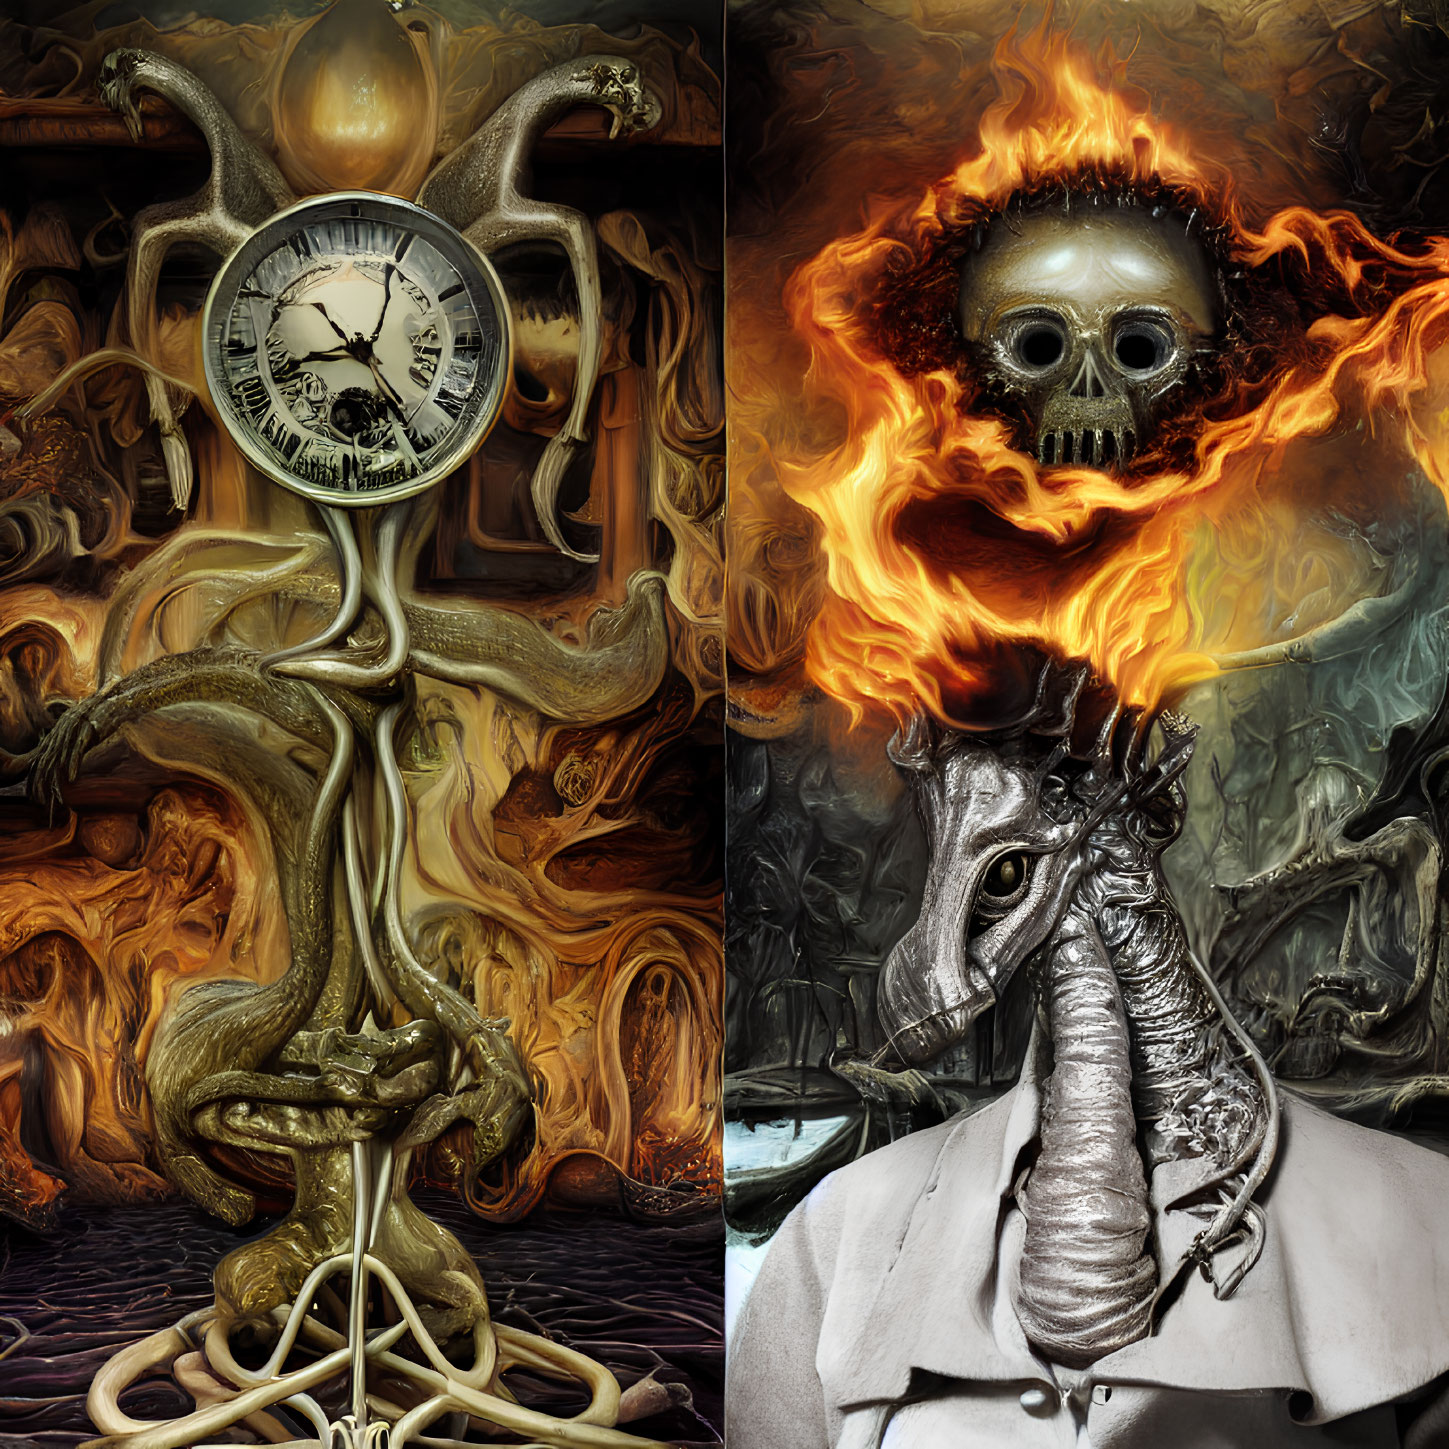 Surreal collage with melting clock tree, fiery skull, smoking seahorse, and Victorian dragon